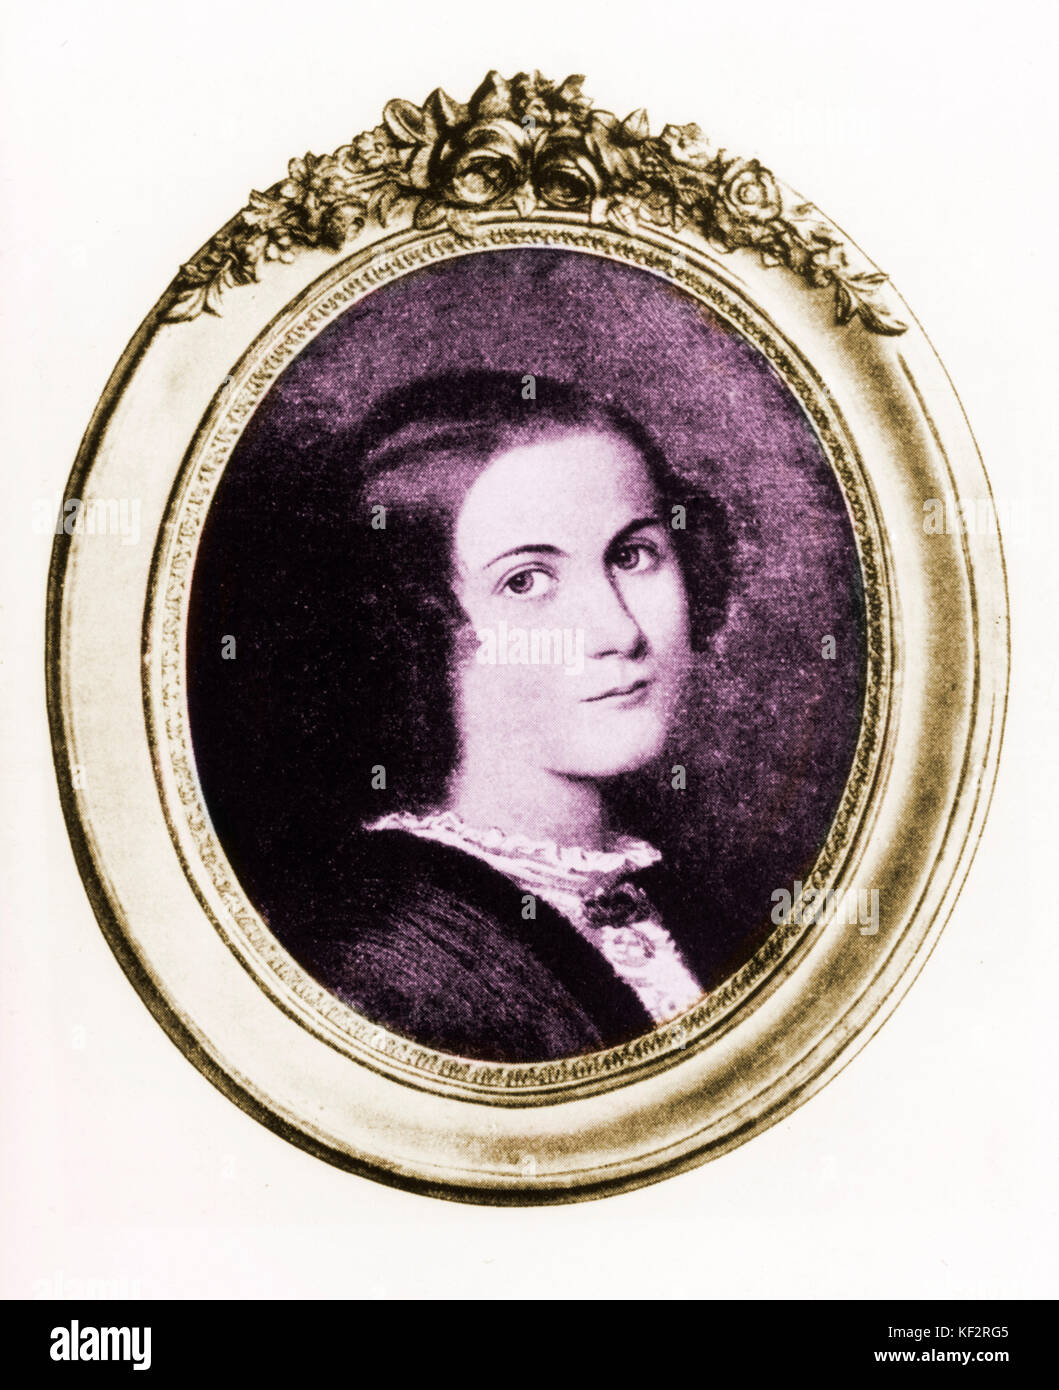 Cecile  / Cacilie Jeanrenaud Mendelssohn when young, probably just before she married Felix Mendelssohn 28th March 1837.  By Philippe Veit. Daughter of French Protestant clergyman - 5 children Felix M.-German composer 1809-1847 Stock Photo